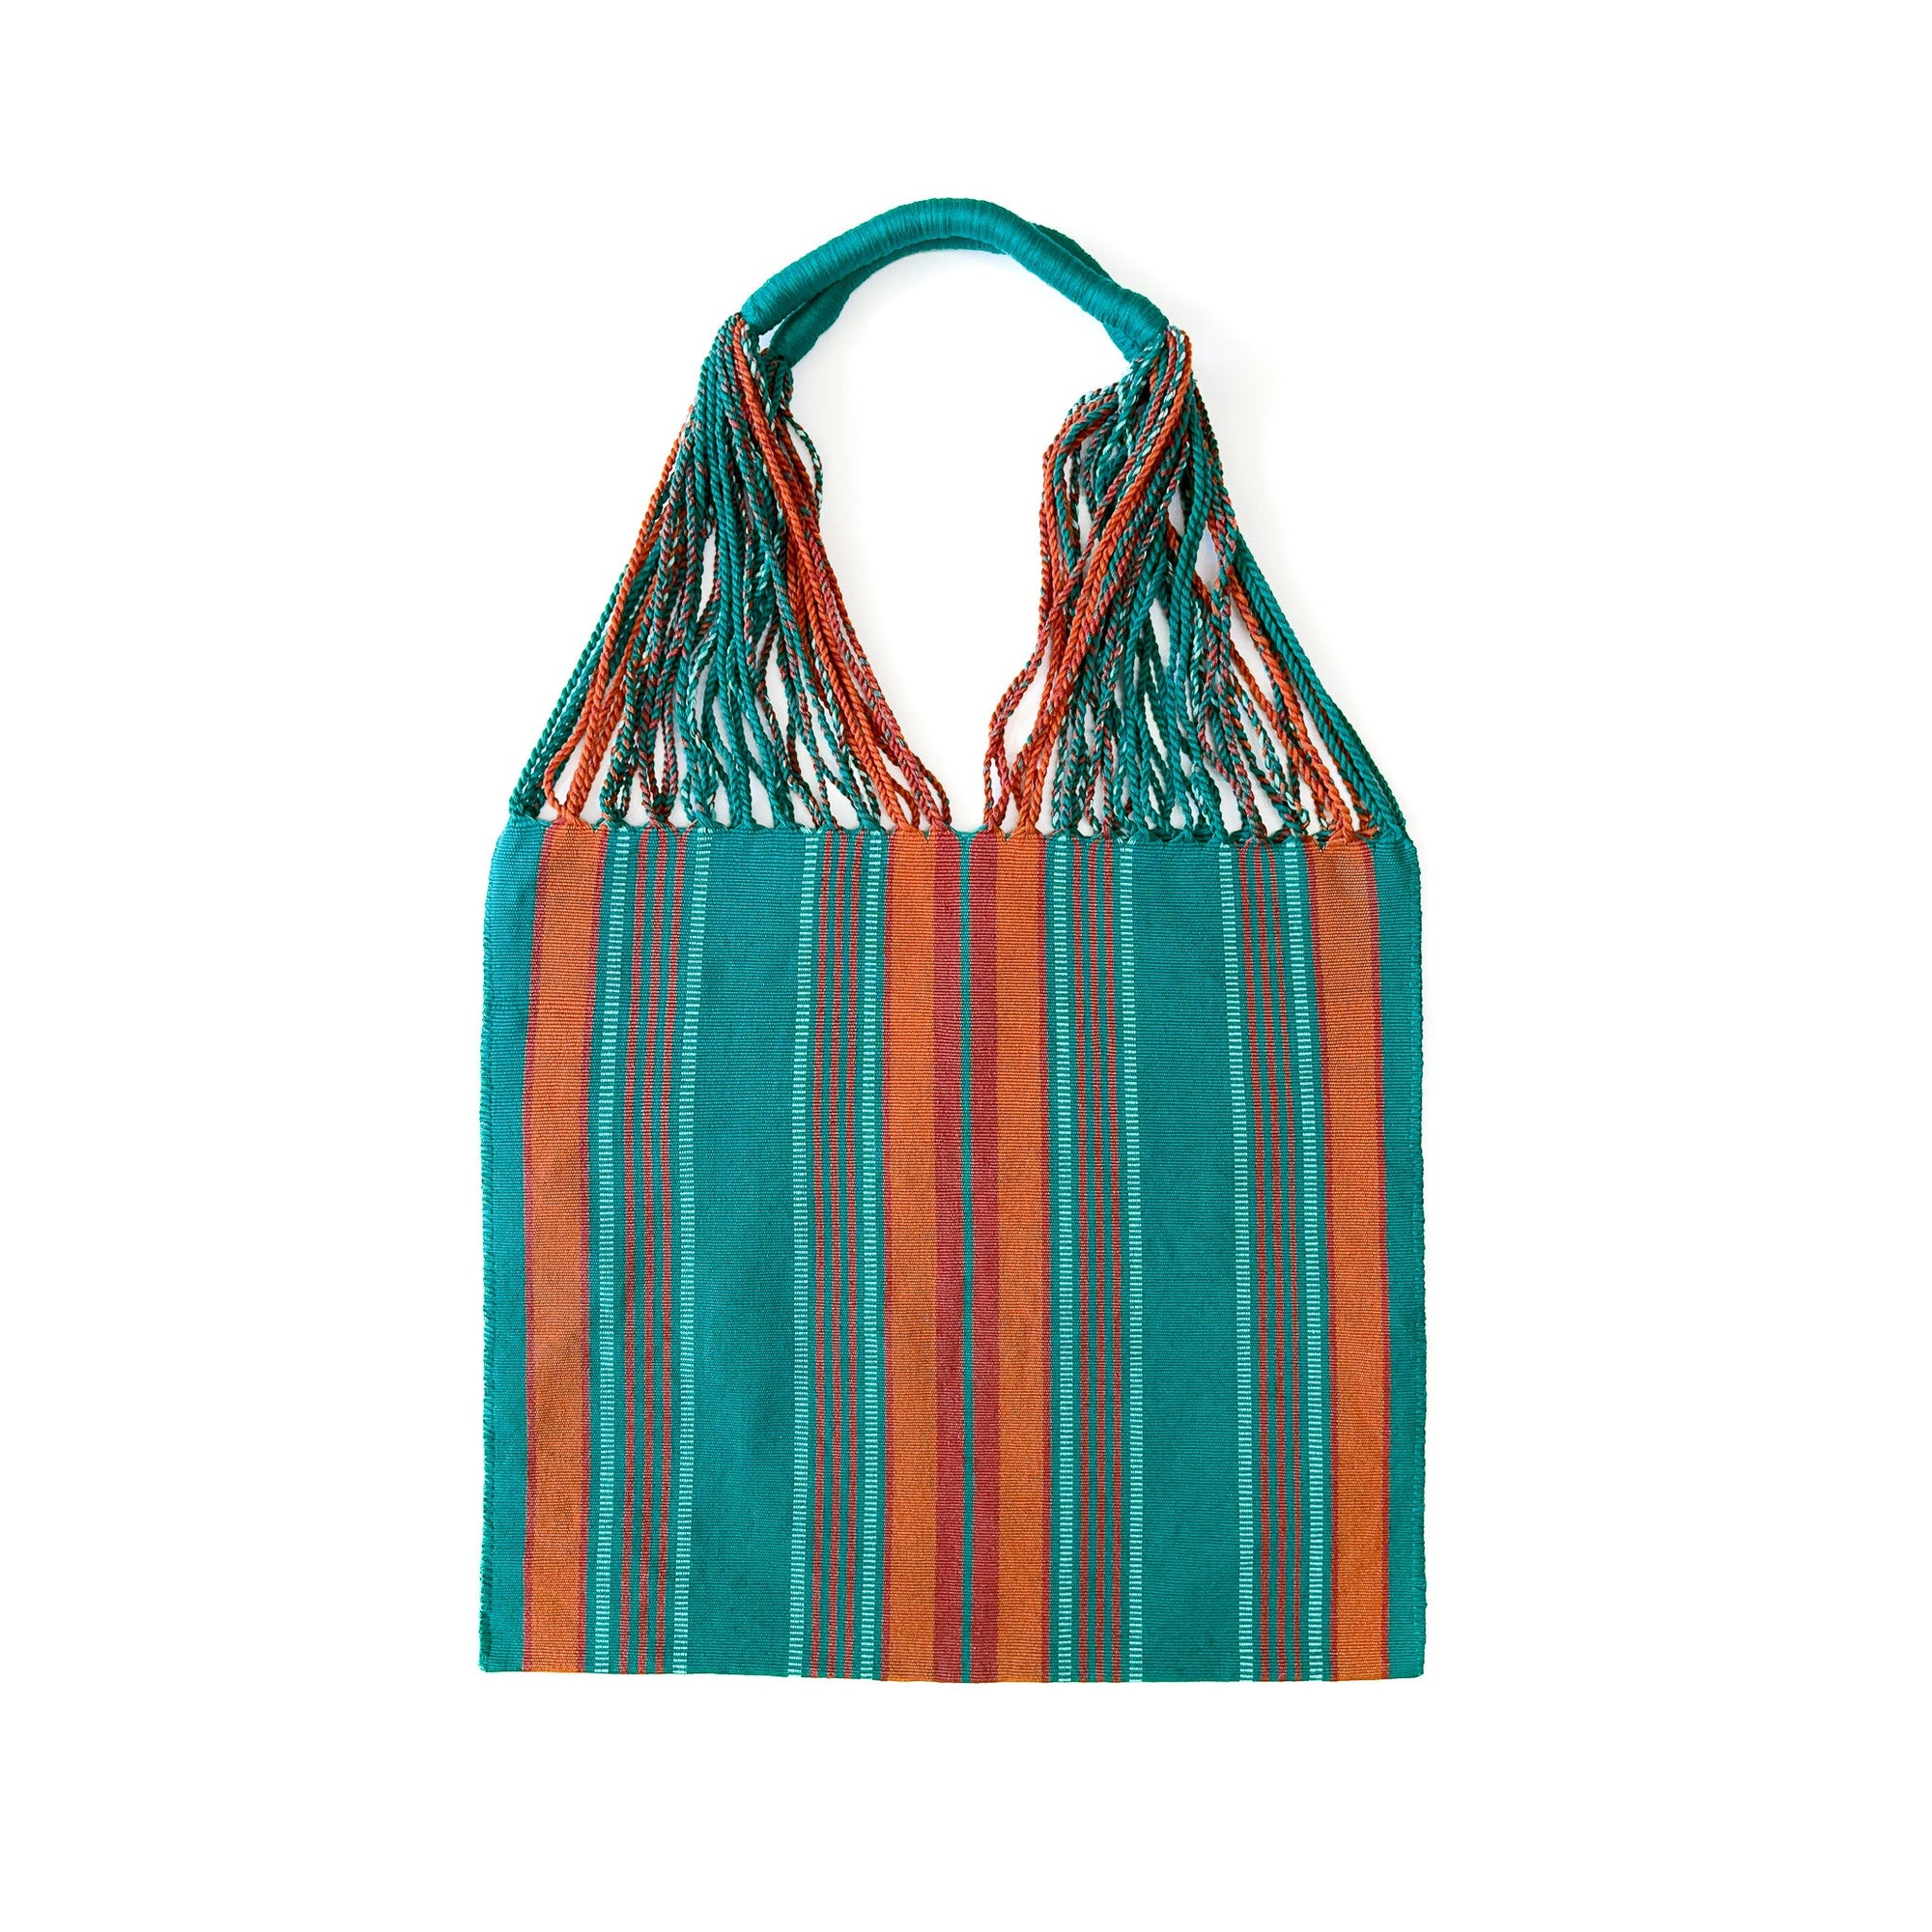 Vibrant handwoven teal and orange market bag, made in Guatemala, held in an outstretched hand against a backdrop of white stone stairs. The bag is filled with fresh-cut white flowers